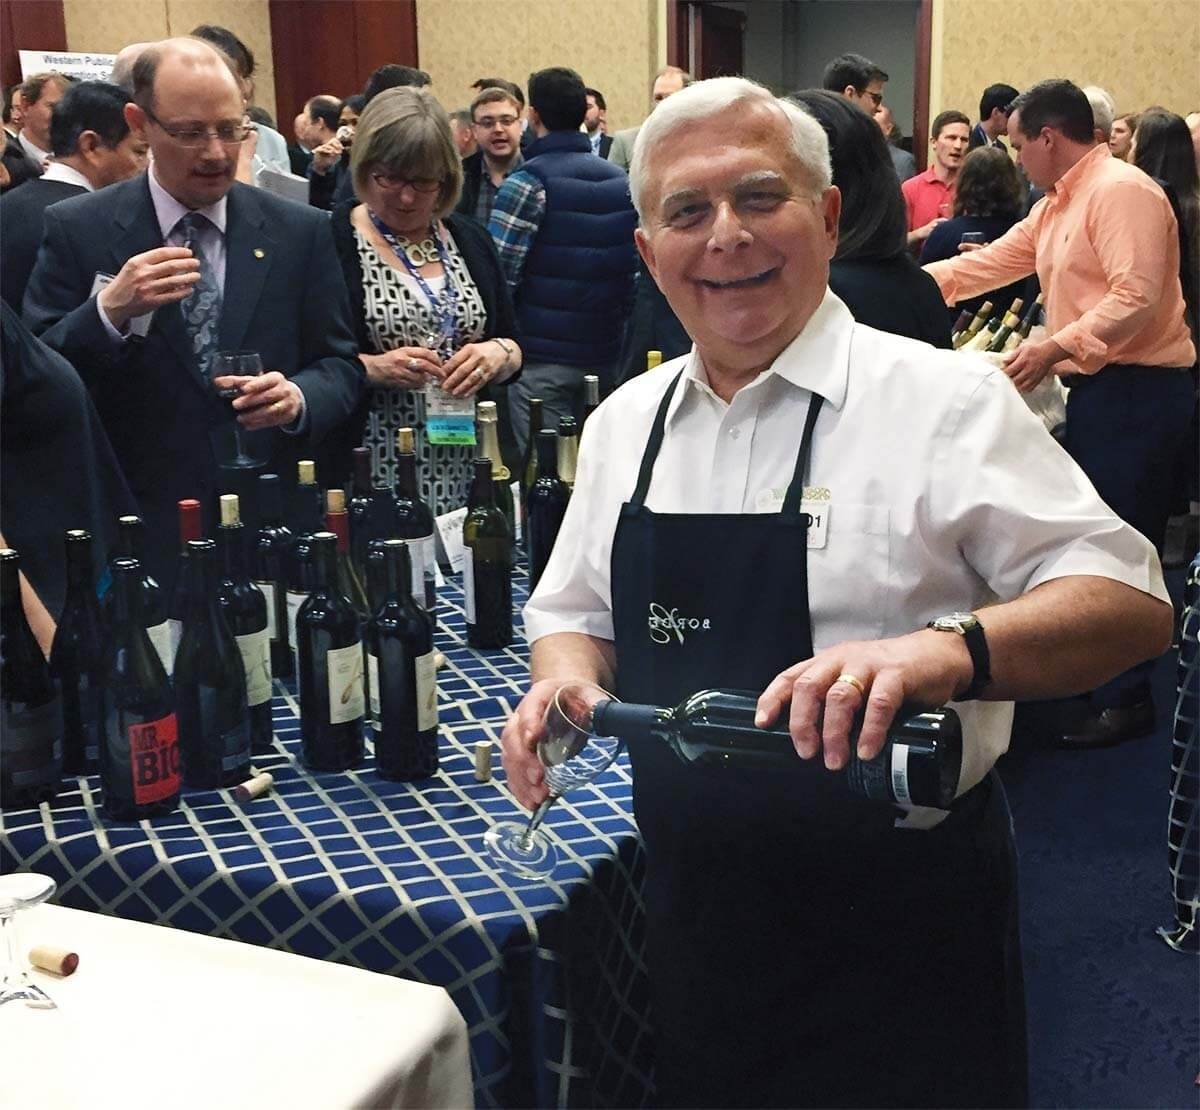 Mike Gianunzio pouring wine as the steward at a Washington, D.C., reception for Pacific Northwest congressional staff